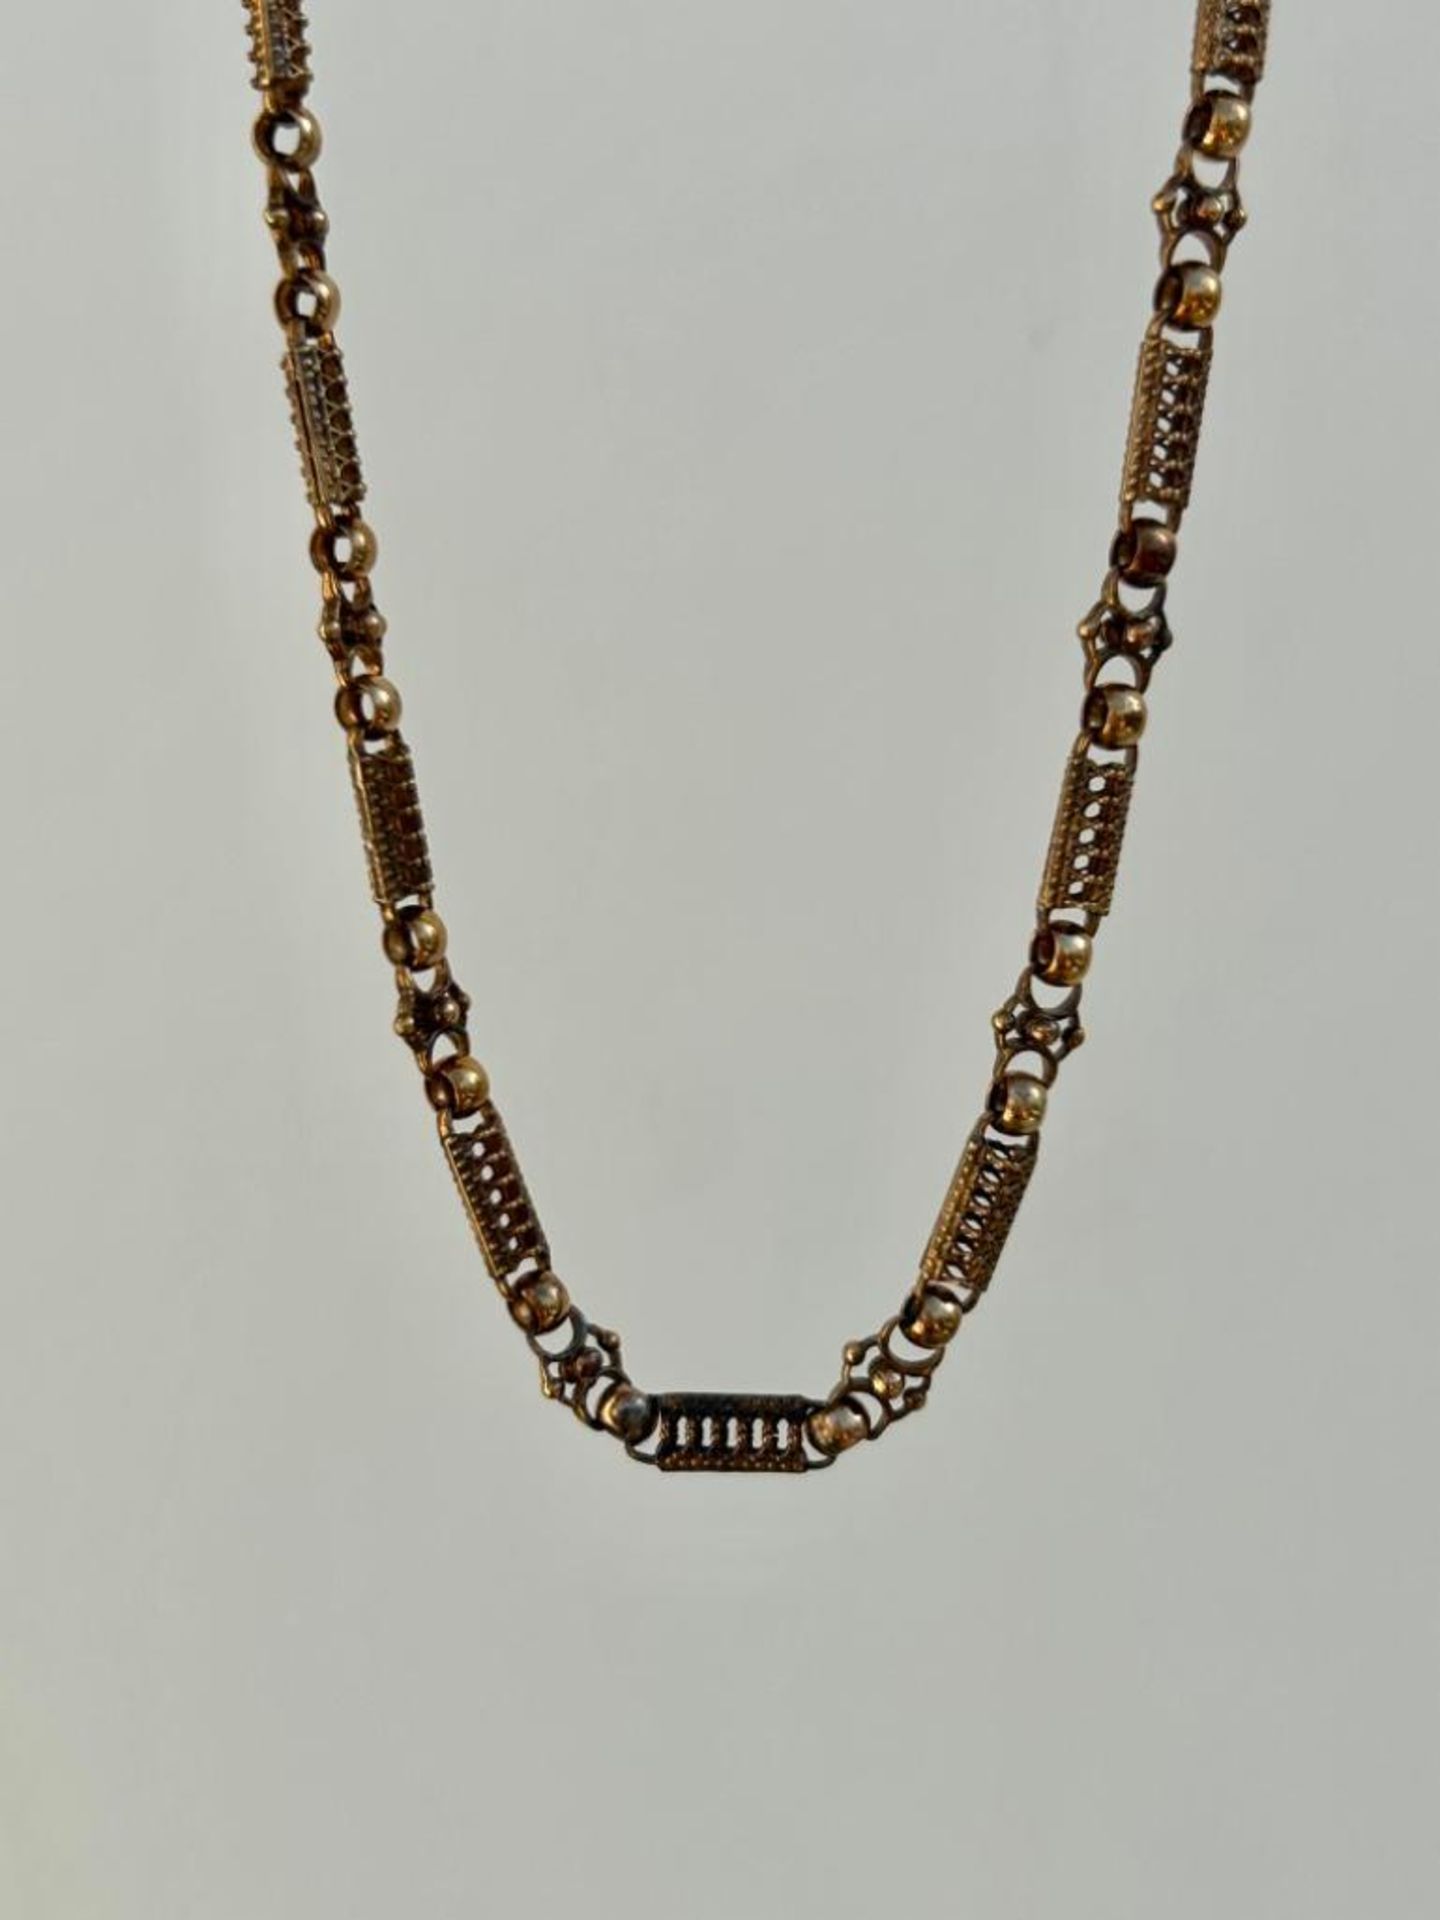 Unusual Link Solid 9ct Gold Chain Necklace